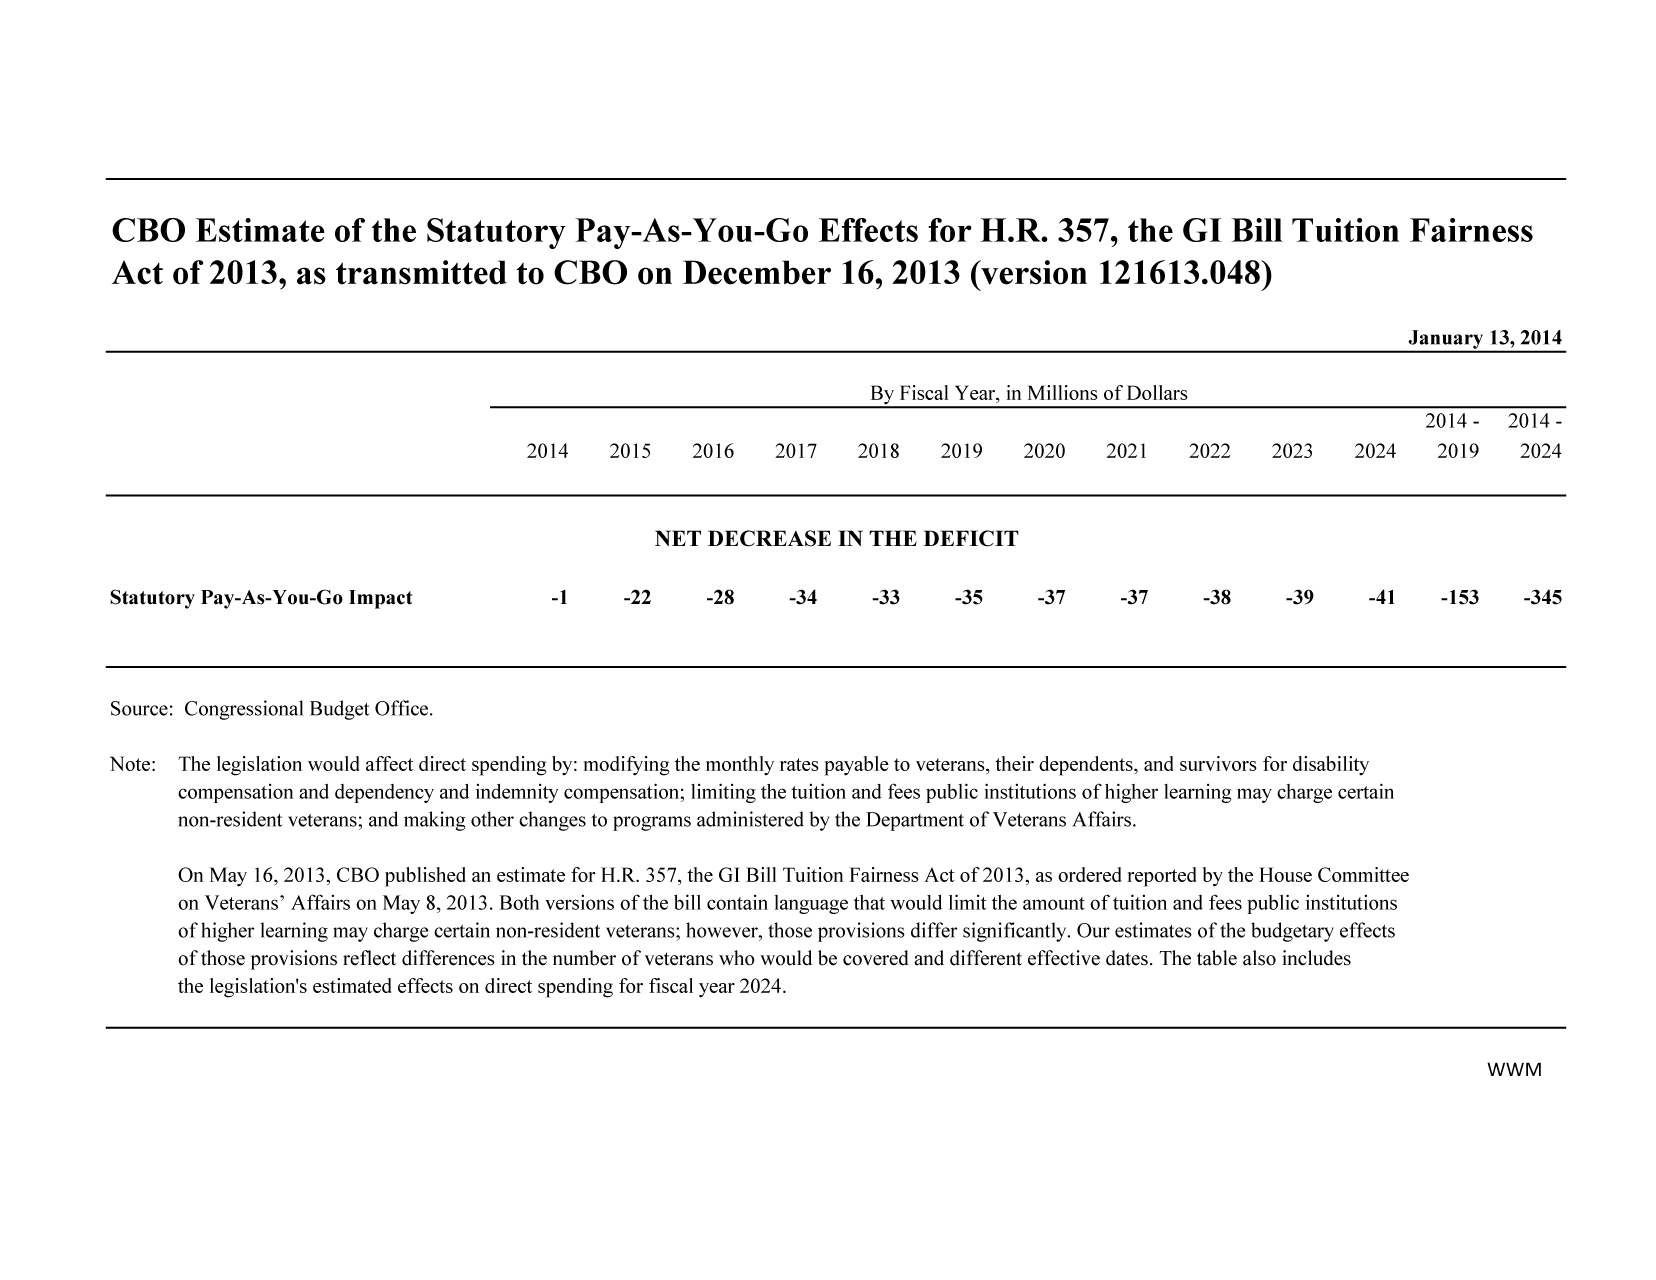 handle is hein.congrec/cbo1478 and id is 1 raw text is: CBO Estimate of the Statutory Pay-As-You-Go Effects for H.R. 357, the GI Bill Tuition Fairne
Act of 2013, as transmitted to CBO on December 16, 2013 (version 121613.048)
January 12
By Fiscal Year, in Millions of Dollars
2014 -
2014     2015    2016     2017    2018     2019     2020    2021     2022    2023     2024     2019
NET DECREASE IN THE DEFICIT
Statutory Pay-As-You-Go Impact                -1     -22      -28      -34     -33      -35     -37      -37      -38     -39      -41    -153
Source: Congressional Budget Office.
Note: The legislation would affect direct spending by: modifying the monthly rates payable to veterans, their dependents, and survivors for disability
compensation and dependency and indemnity compensation; limiting the tuition and fees public institutions of higher learning may charge certain
non-resident veterans; and making other changes to programs administered by the Department of Veterans Affairs.
On May 16, 2013, CBO published an estimate for H.R. 357, the GI Bill Tuition Fairness Act of 2013, as ordered reported by the House Committee
on Veterans' Affairs on May 8, 2013. Both versions of the bill contain language that would limit the amount of tuition and fees public institutions
of higher learning may charge certain non-resident veterans; however, those provisions differ significantly. Our estimates of the budgetary effects
of those provisions reflect differences in the number of veterans who would be covered and different effective dates. The table also includes
the legislation's estimated effects on direct spending for fiscal year 2024.

oss
3,2014
2014 -
2024
-345

WWM


